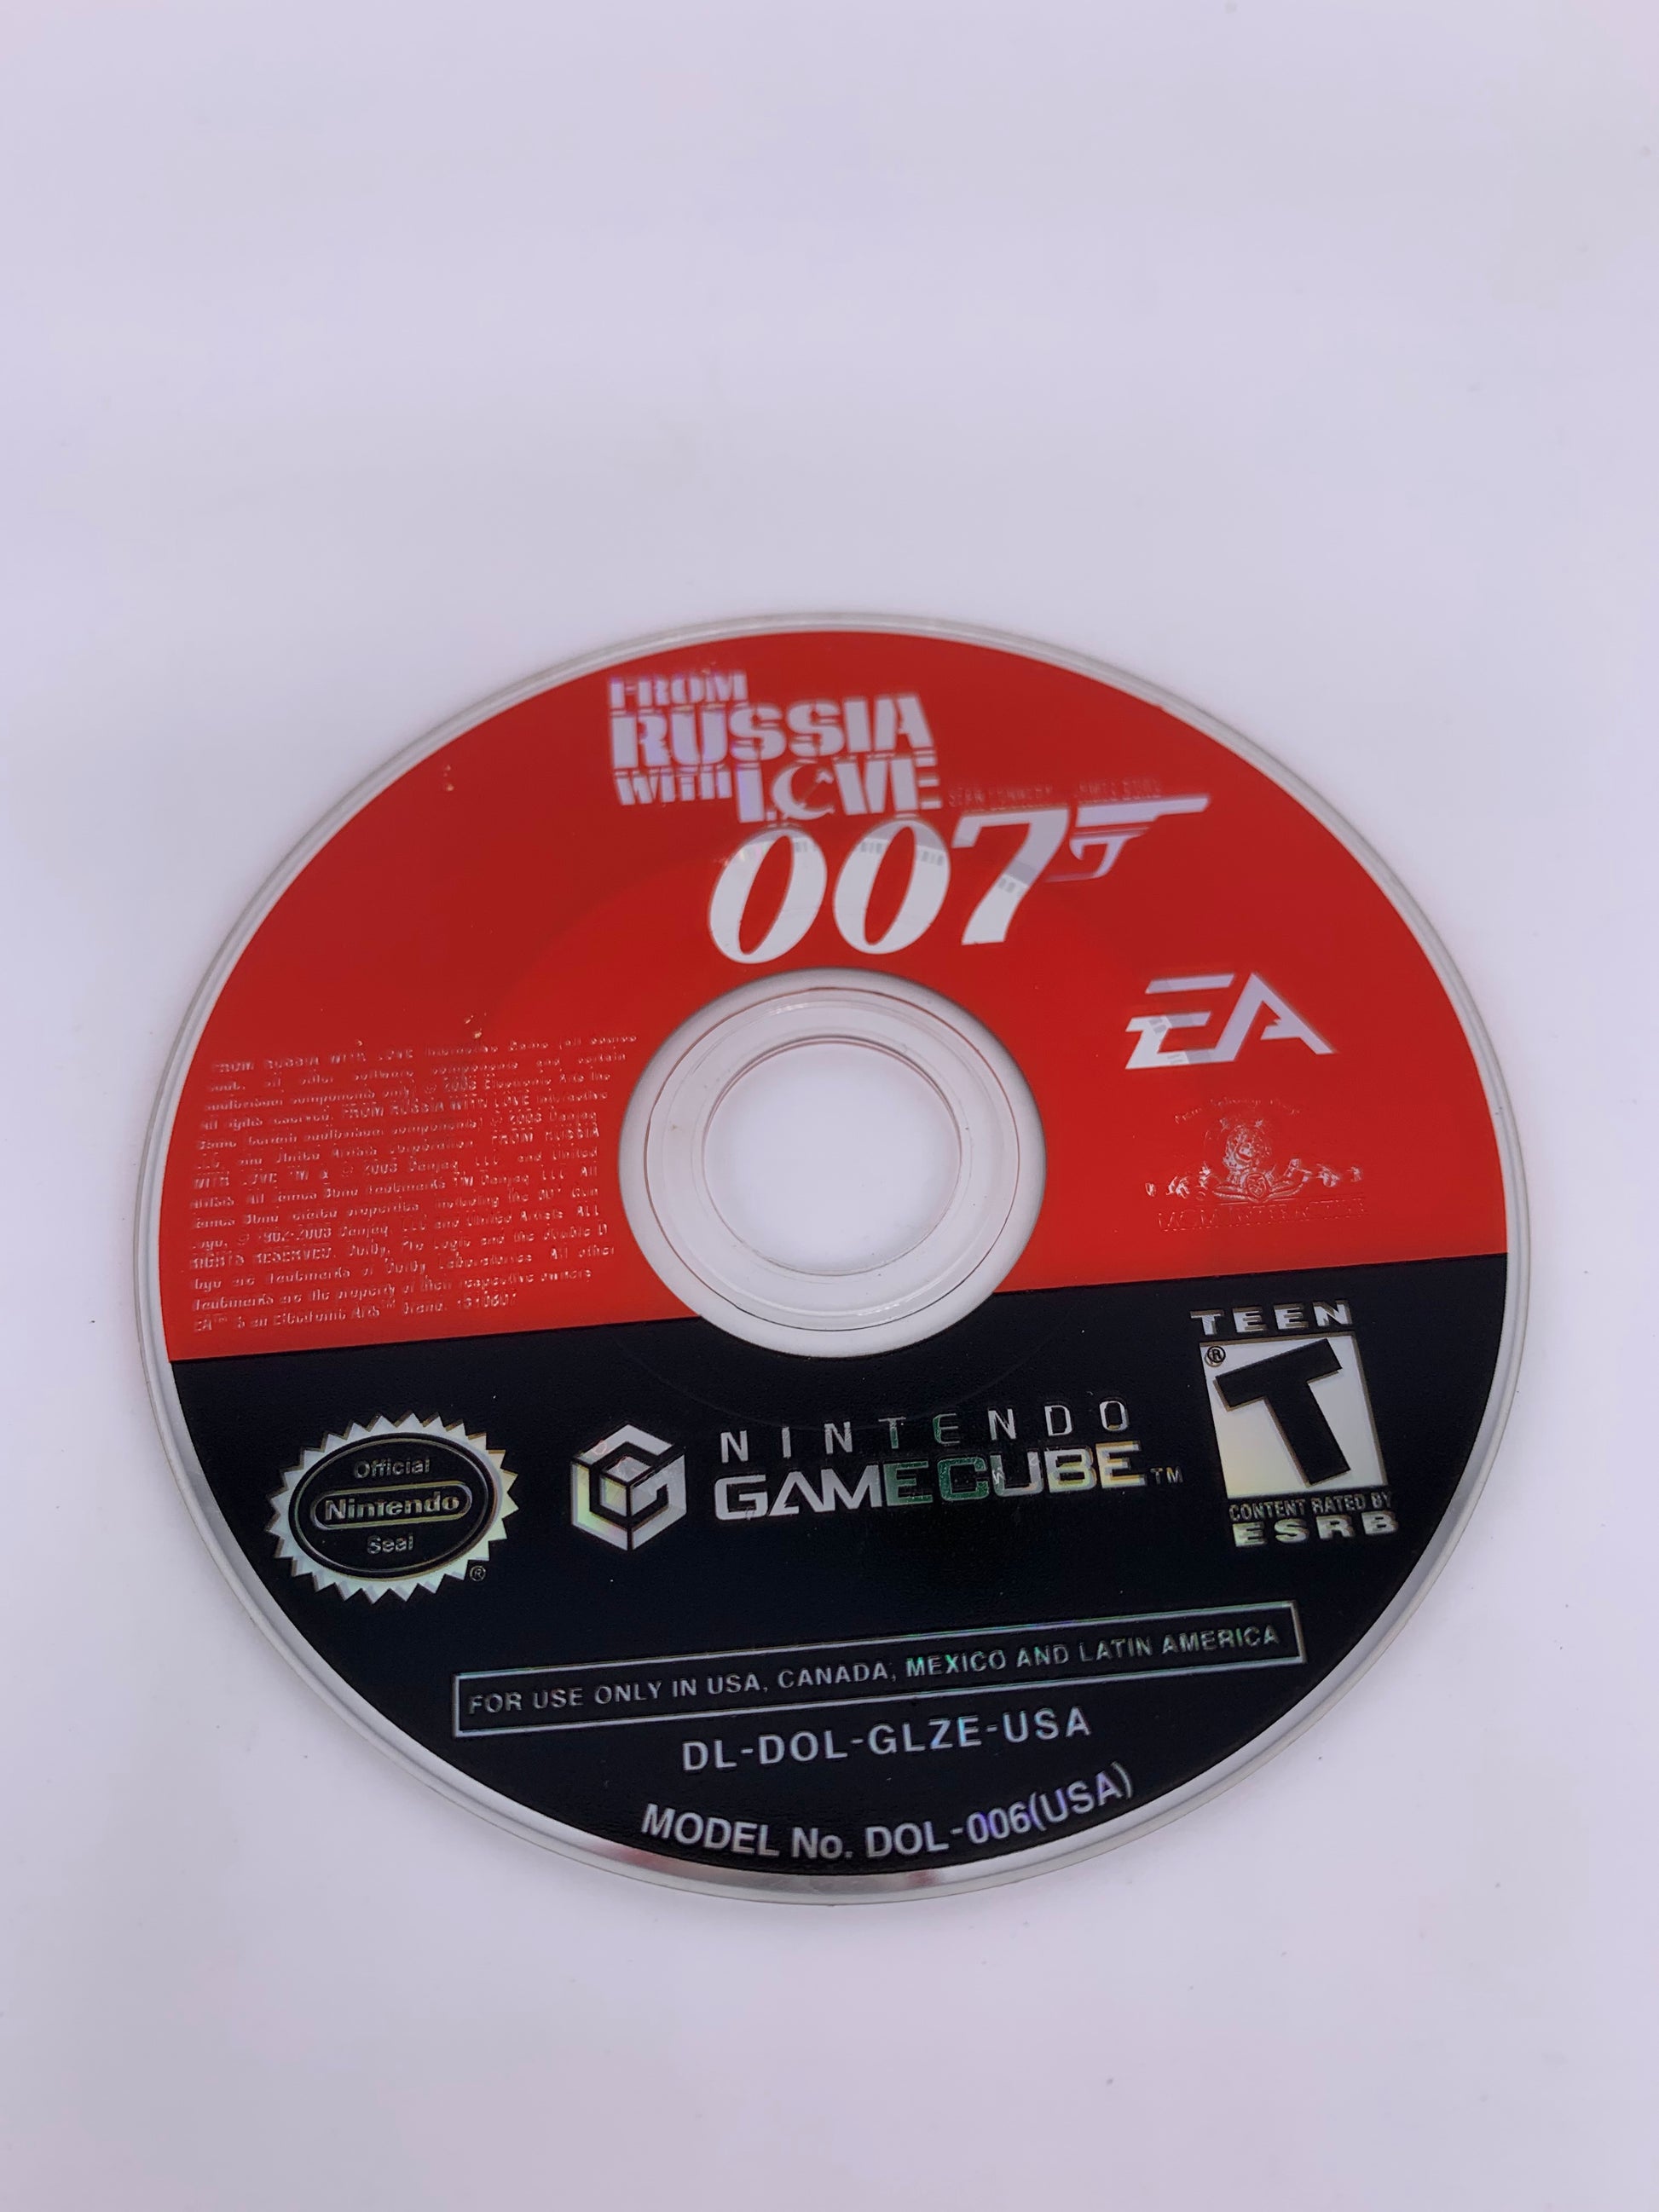 PiXEL-RETRO.COM : NINTENDO GAMECUBE (GC) GAME NTSC 007 FROM RUSSIA WITH LOVE